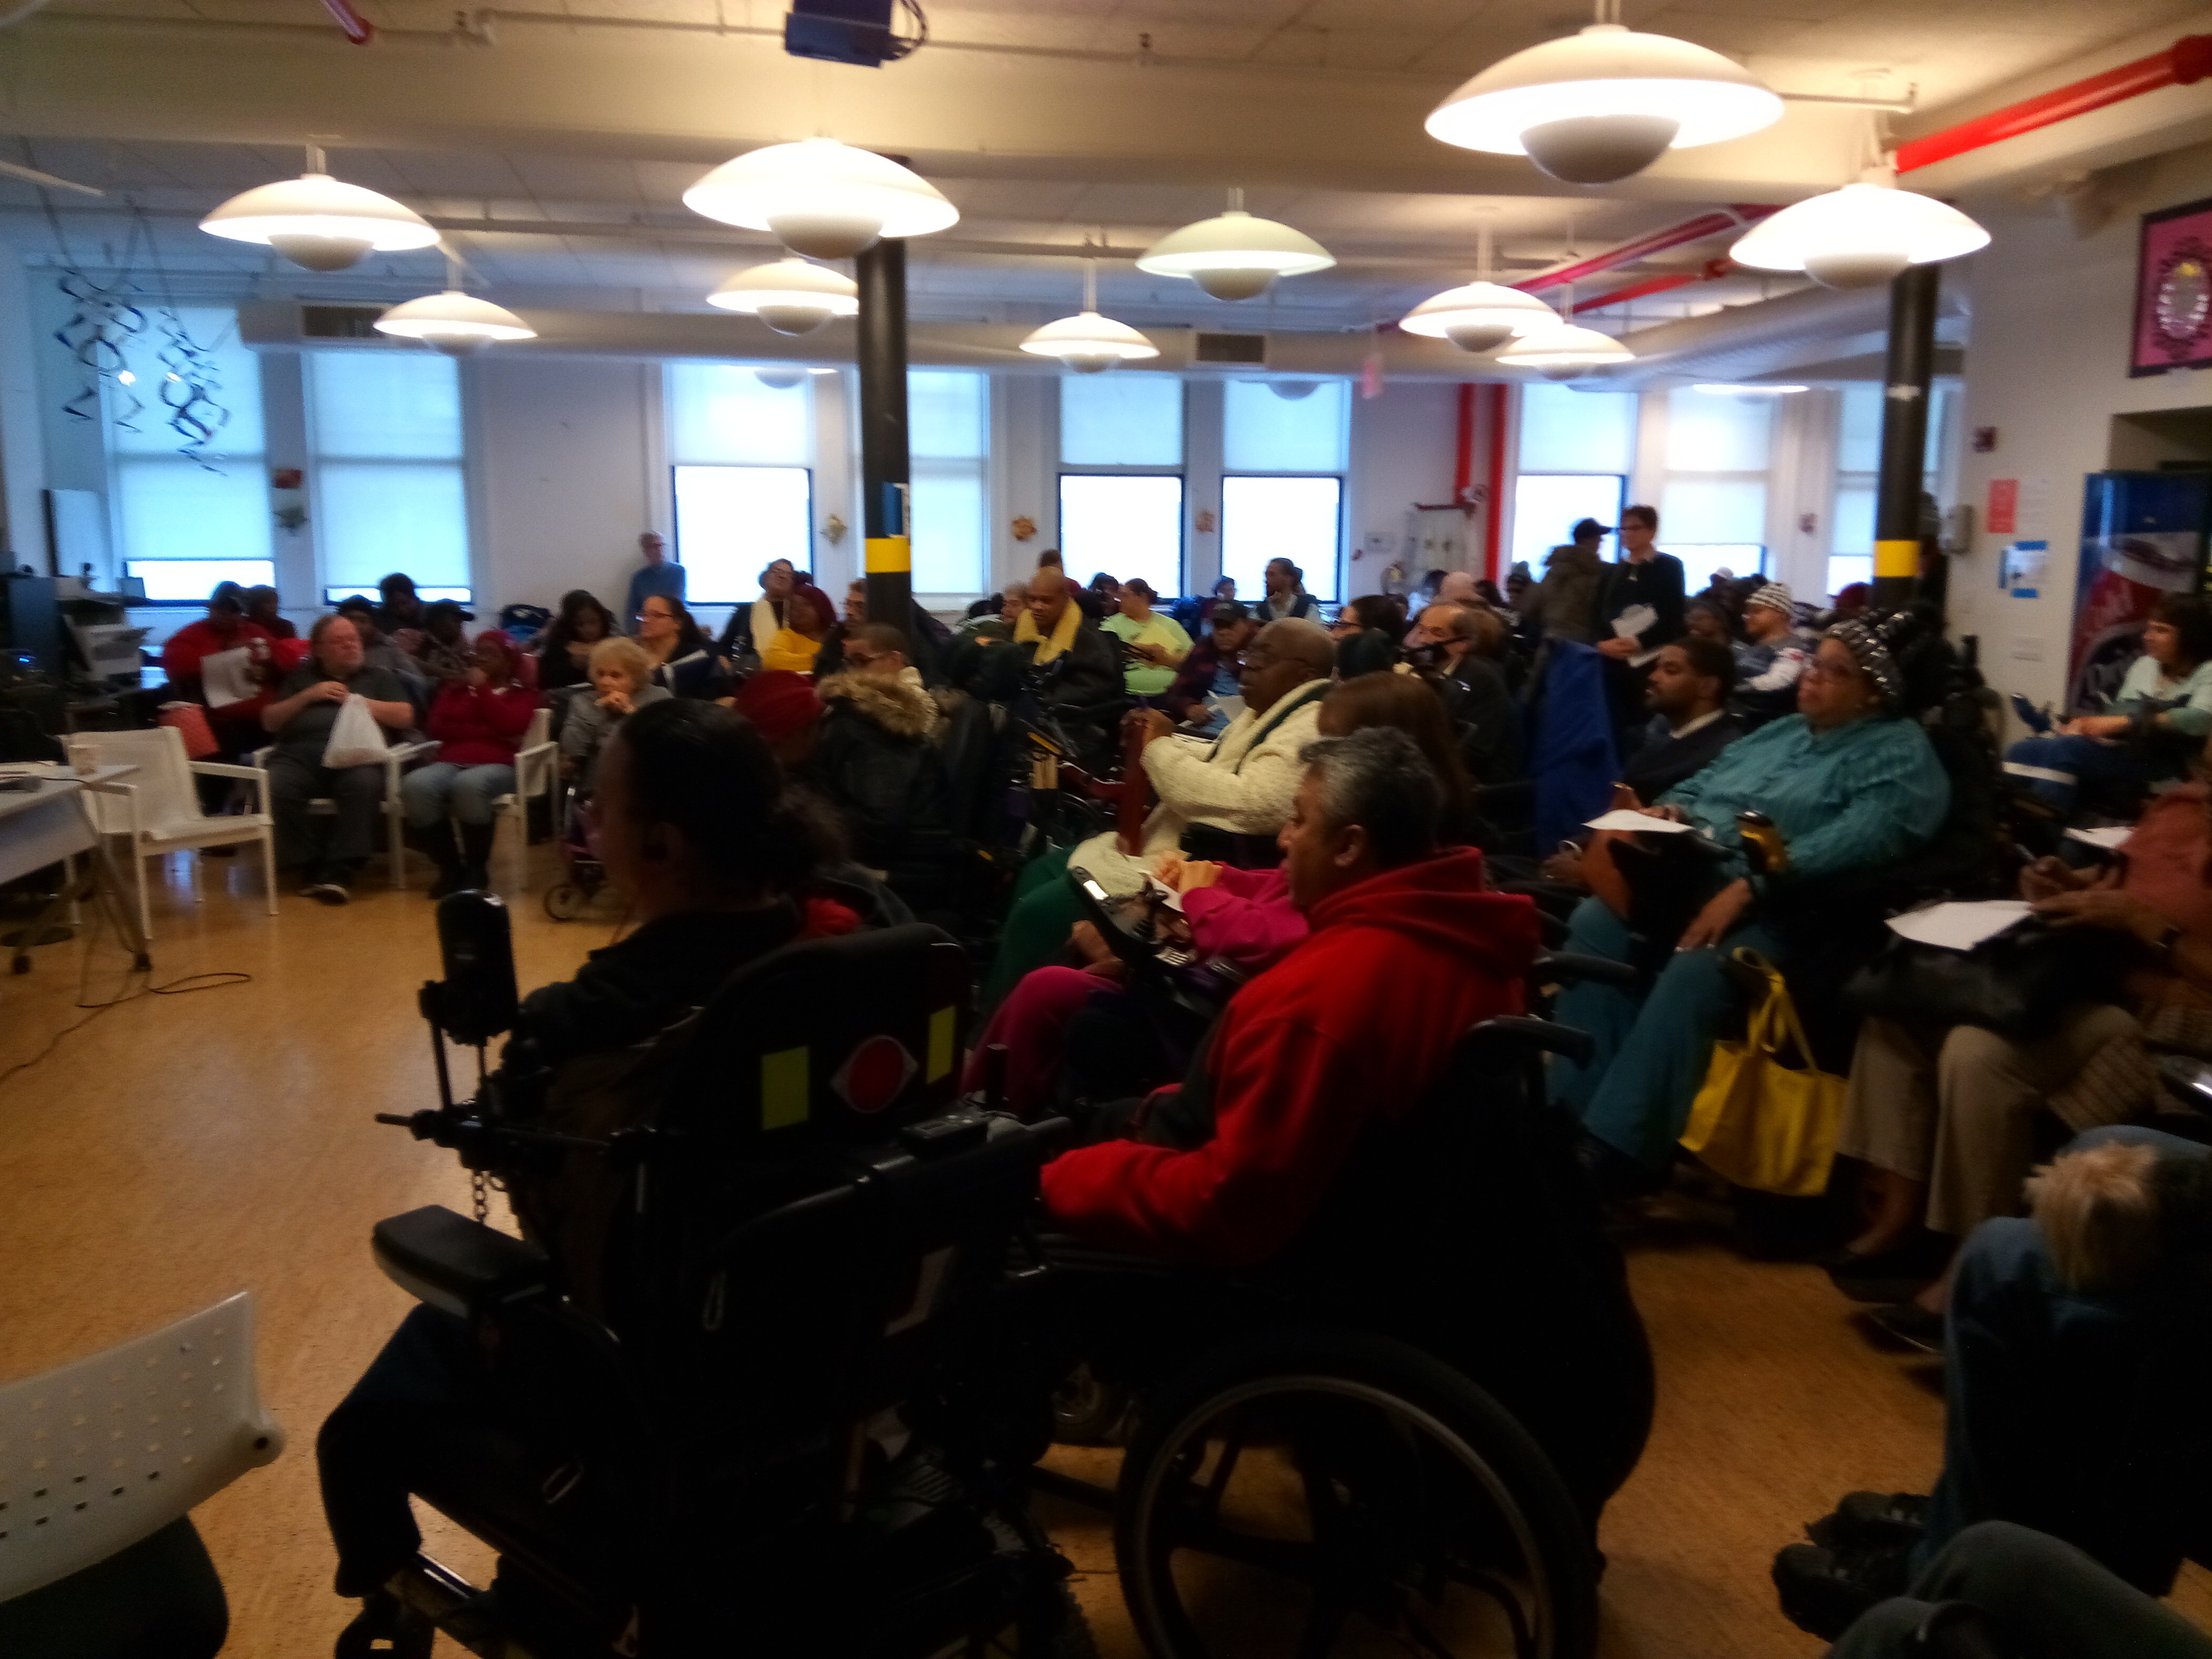 Meeting in a large room with people in chairs
	    	and wheelchairs.